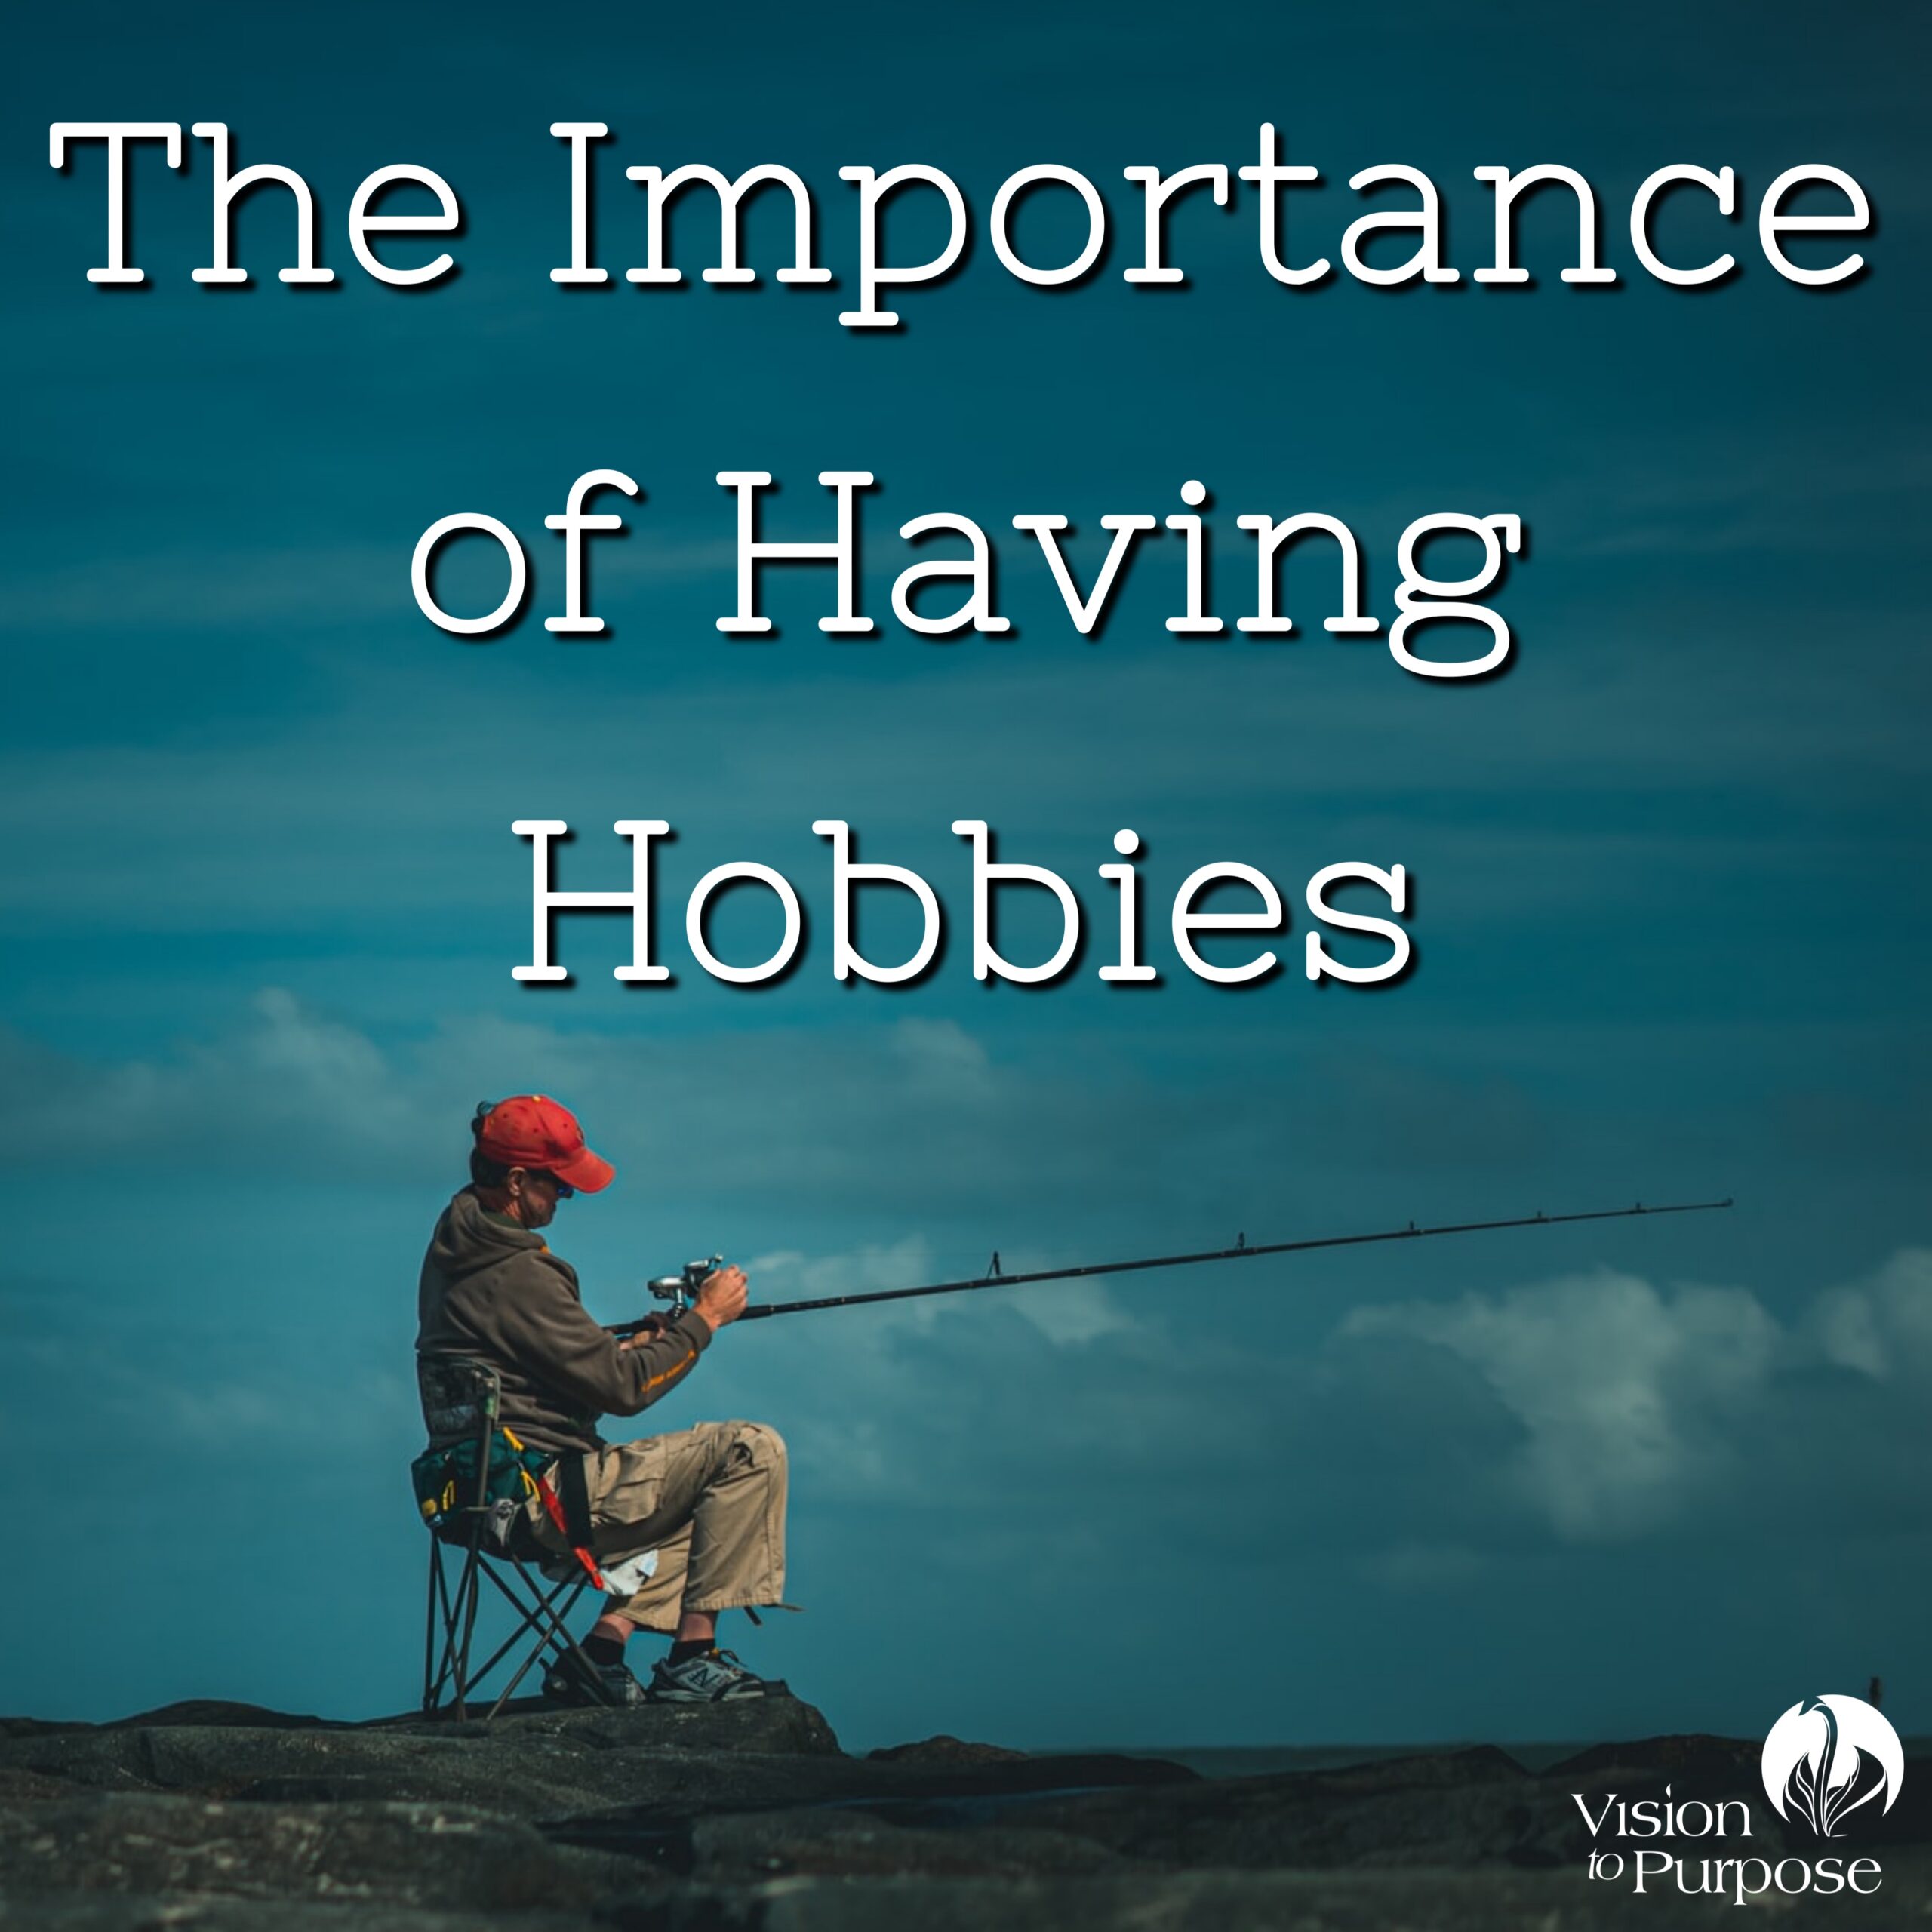 The Importance of Having Hobbies